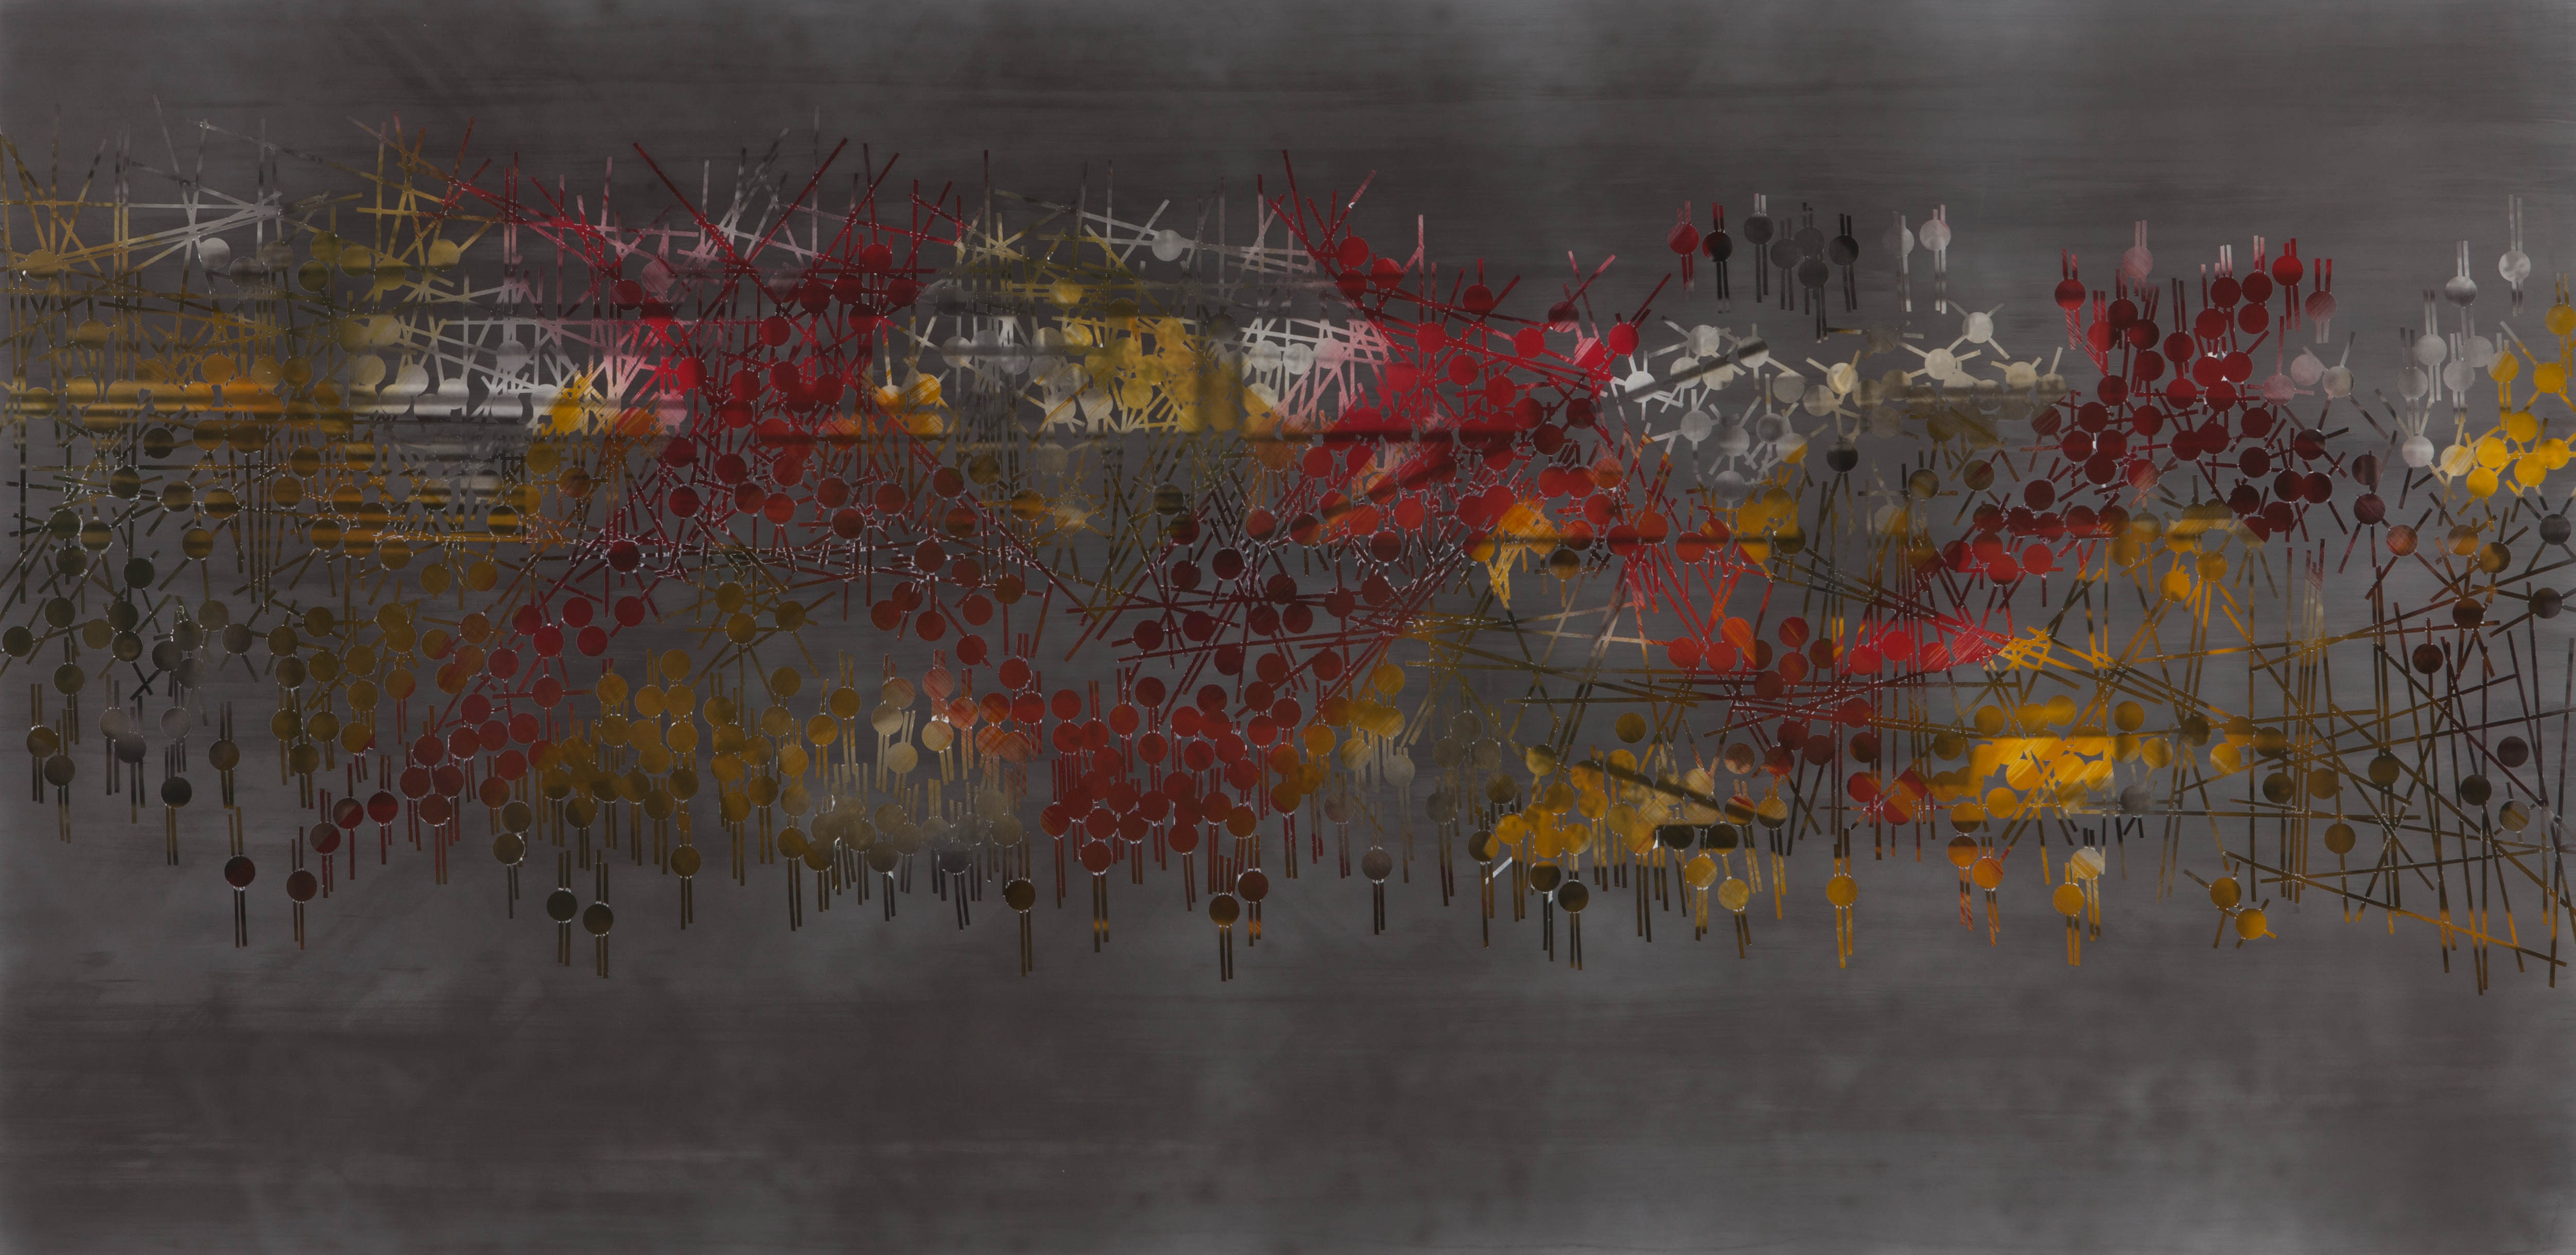 TRIBE 182 - 2013, acrylic, watercolor, graphite on paper, 35.5 x 72 inches (AVAILABLE)